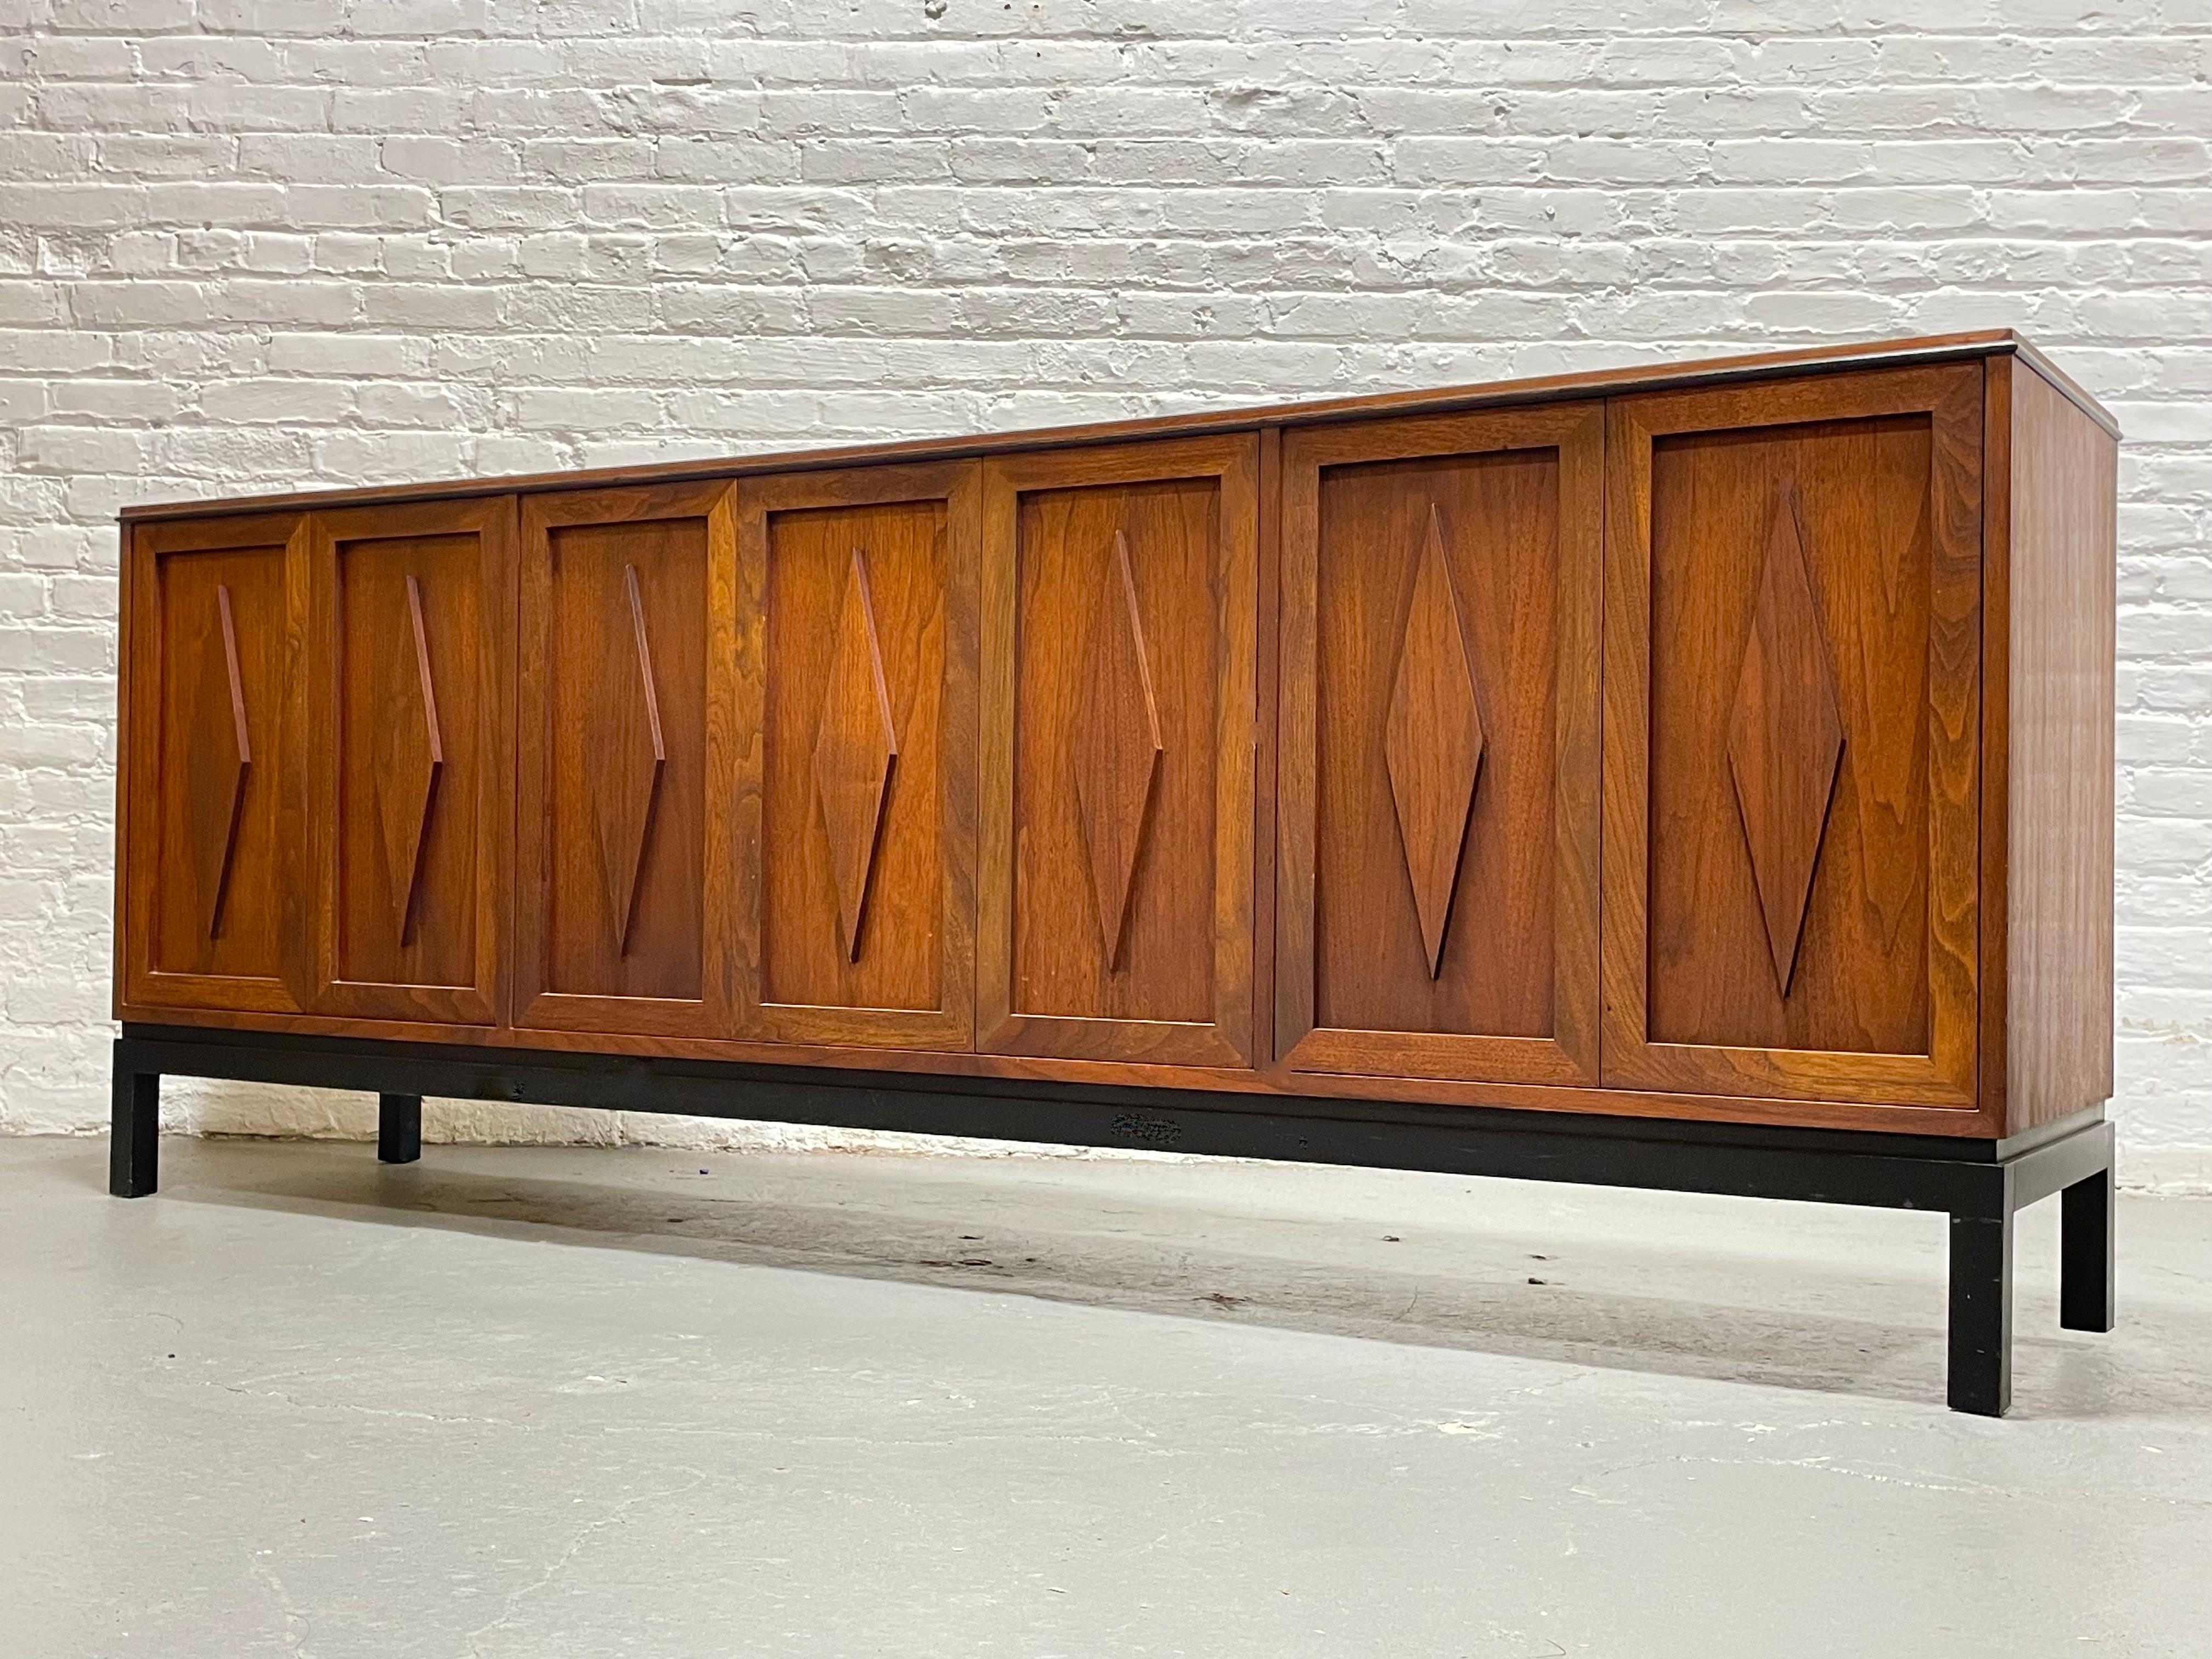 Mid-20th Century Extra LONG Mid Century MODERN Walnut CREDENZA / Media Stand, c. 1960s For Sale